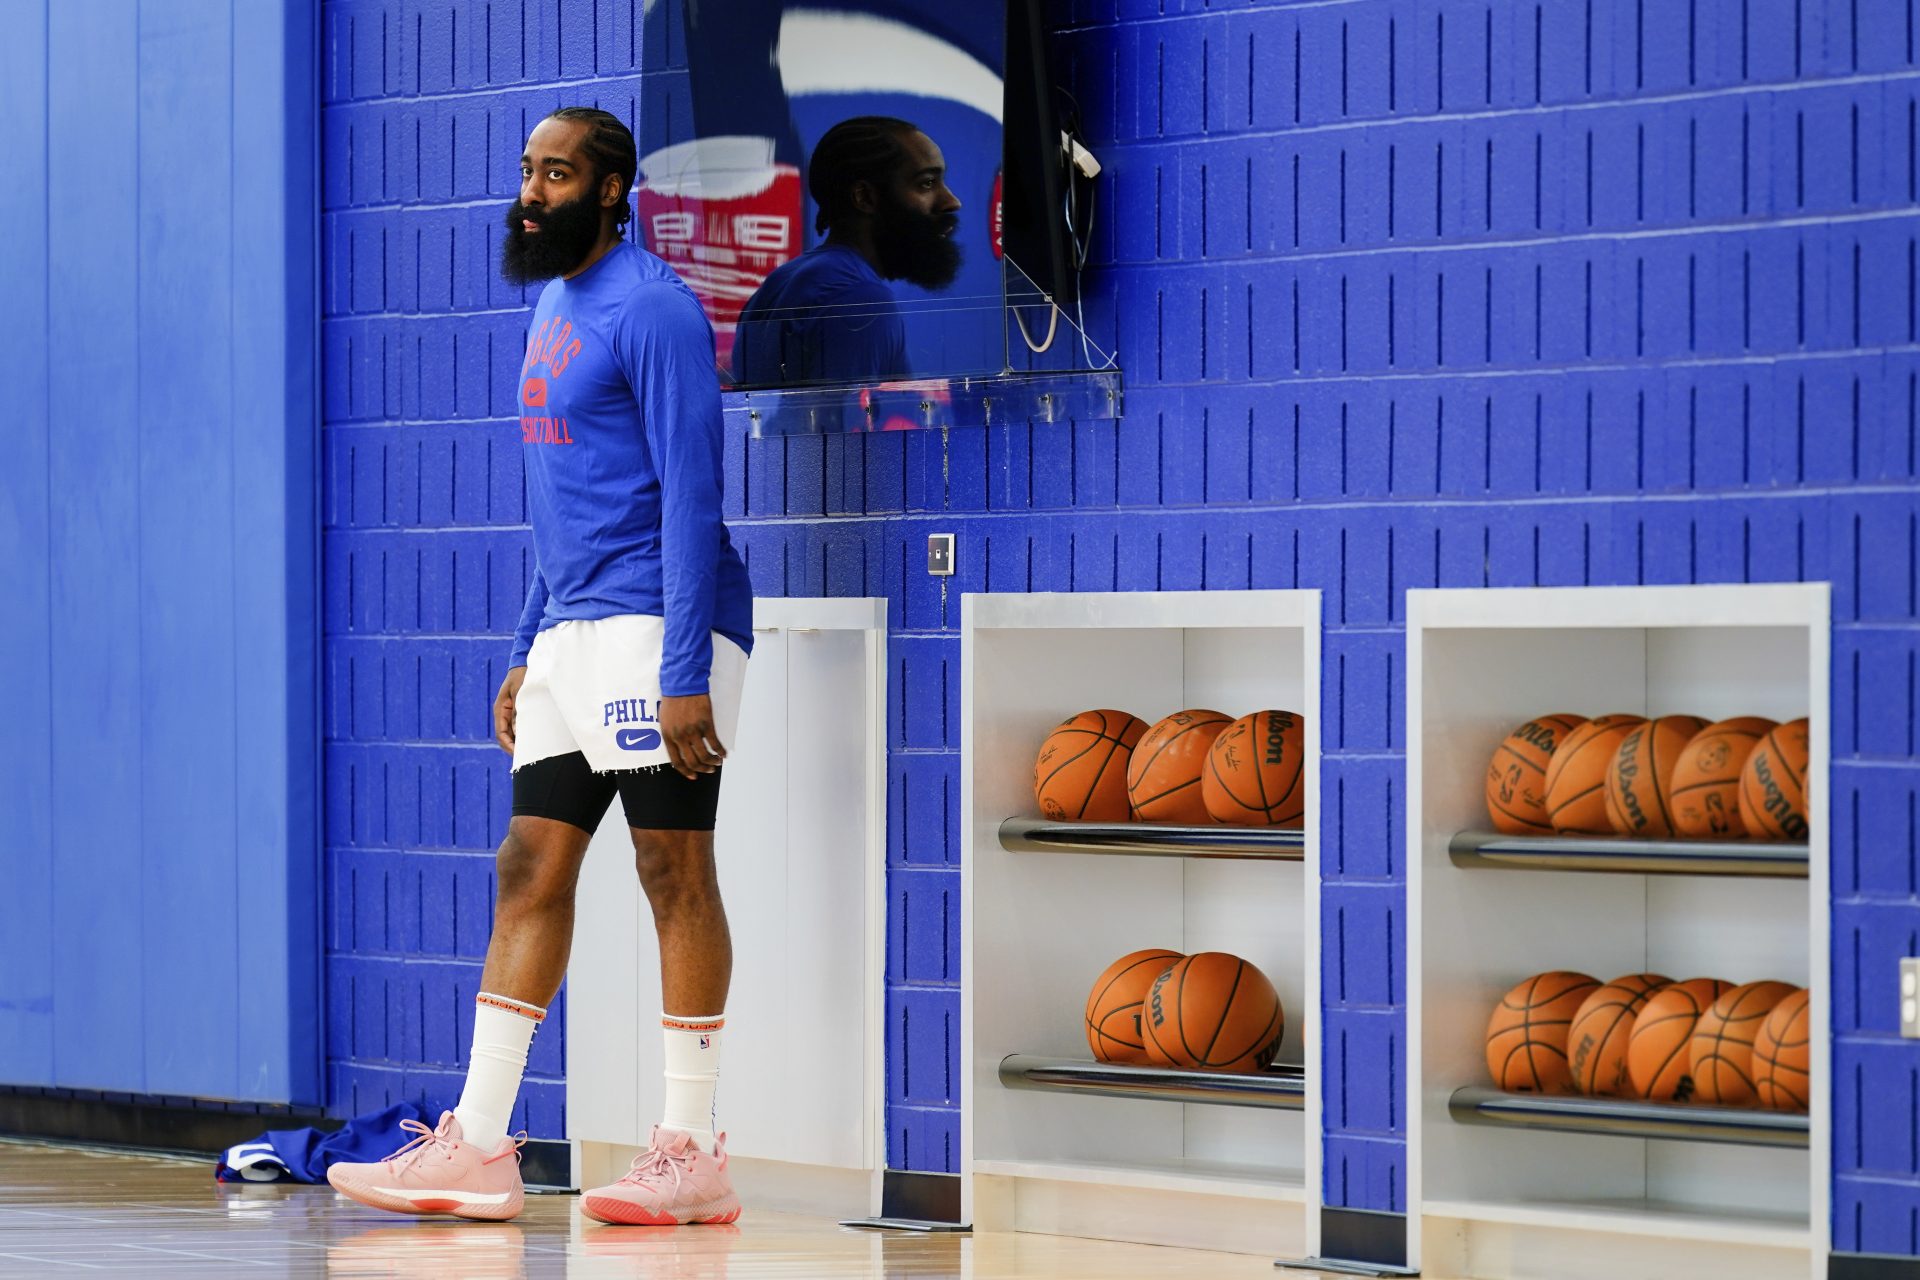 Philadelphia 76ers' James Harden pauses between drills during practice at the NBA basketball team's facility, in Camden, N.J., Tuesday, March 1, 2022.